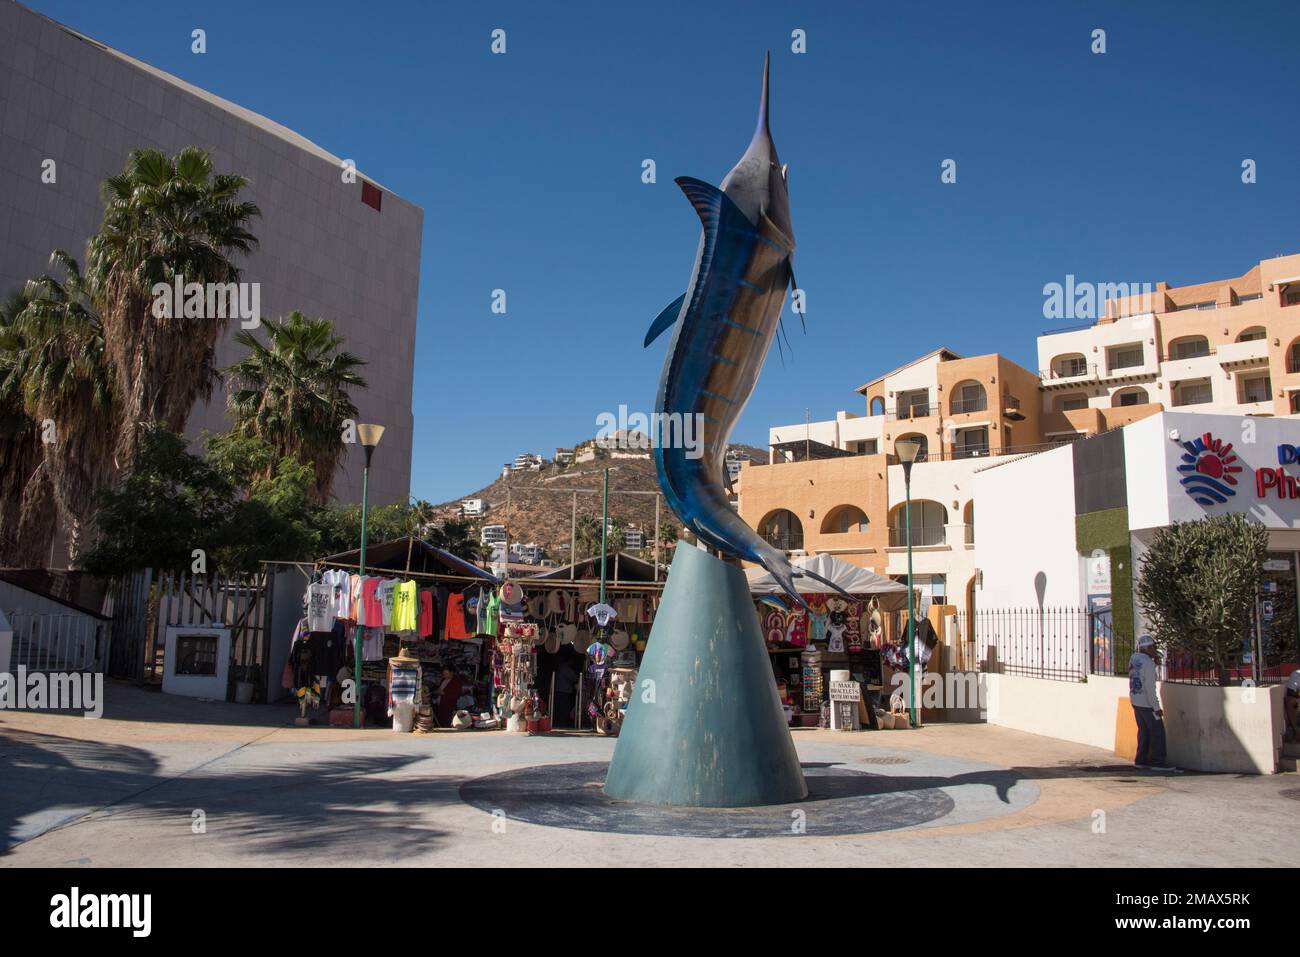 A statue of a swordfish or marlin adorns the main plaza of the harbor of Cabo San Lucas, Mexican Riviera, Mexico Stock Photo